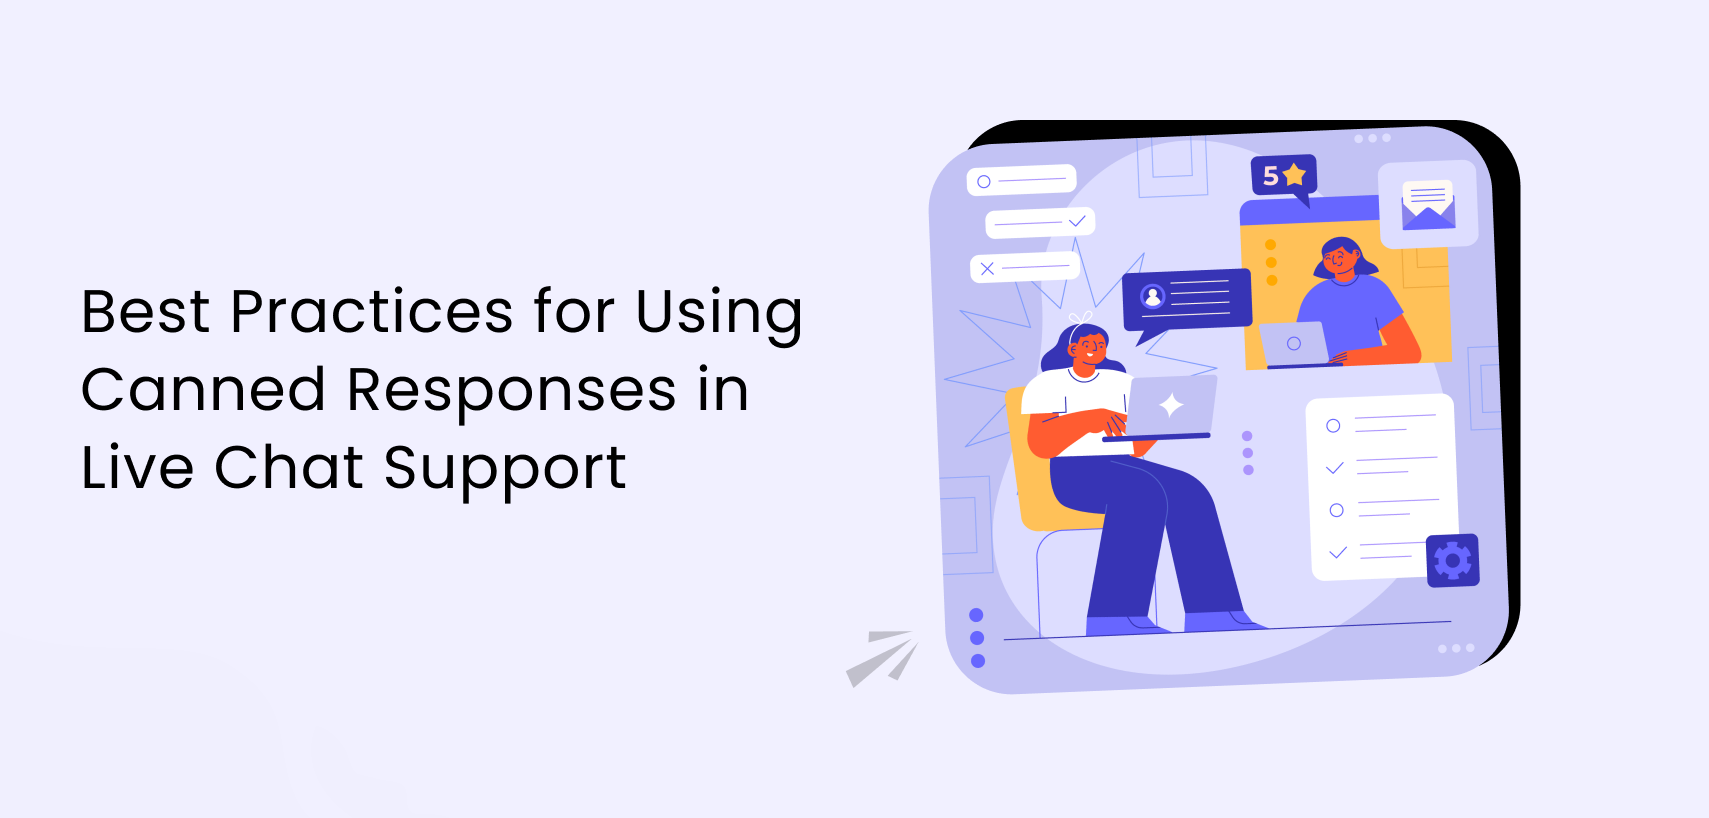 Best Practices for Using Canned Responses in Live Chat Support